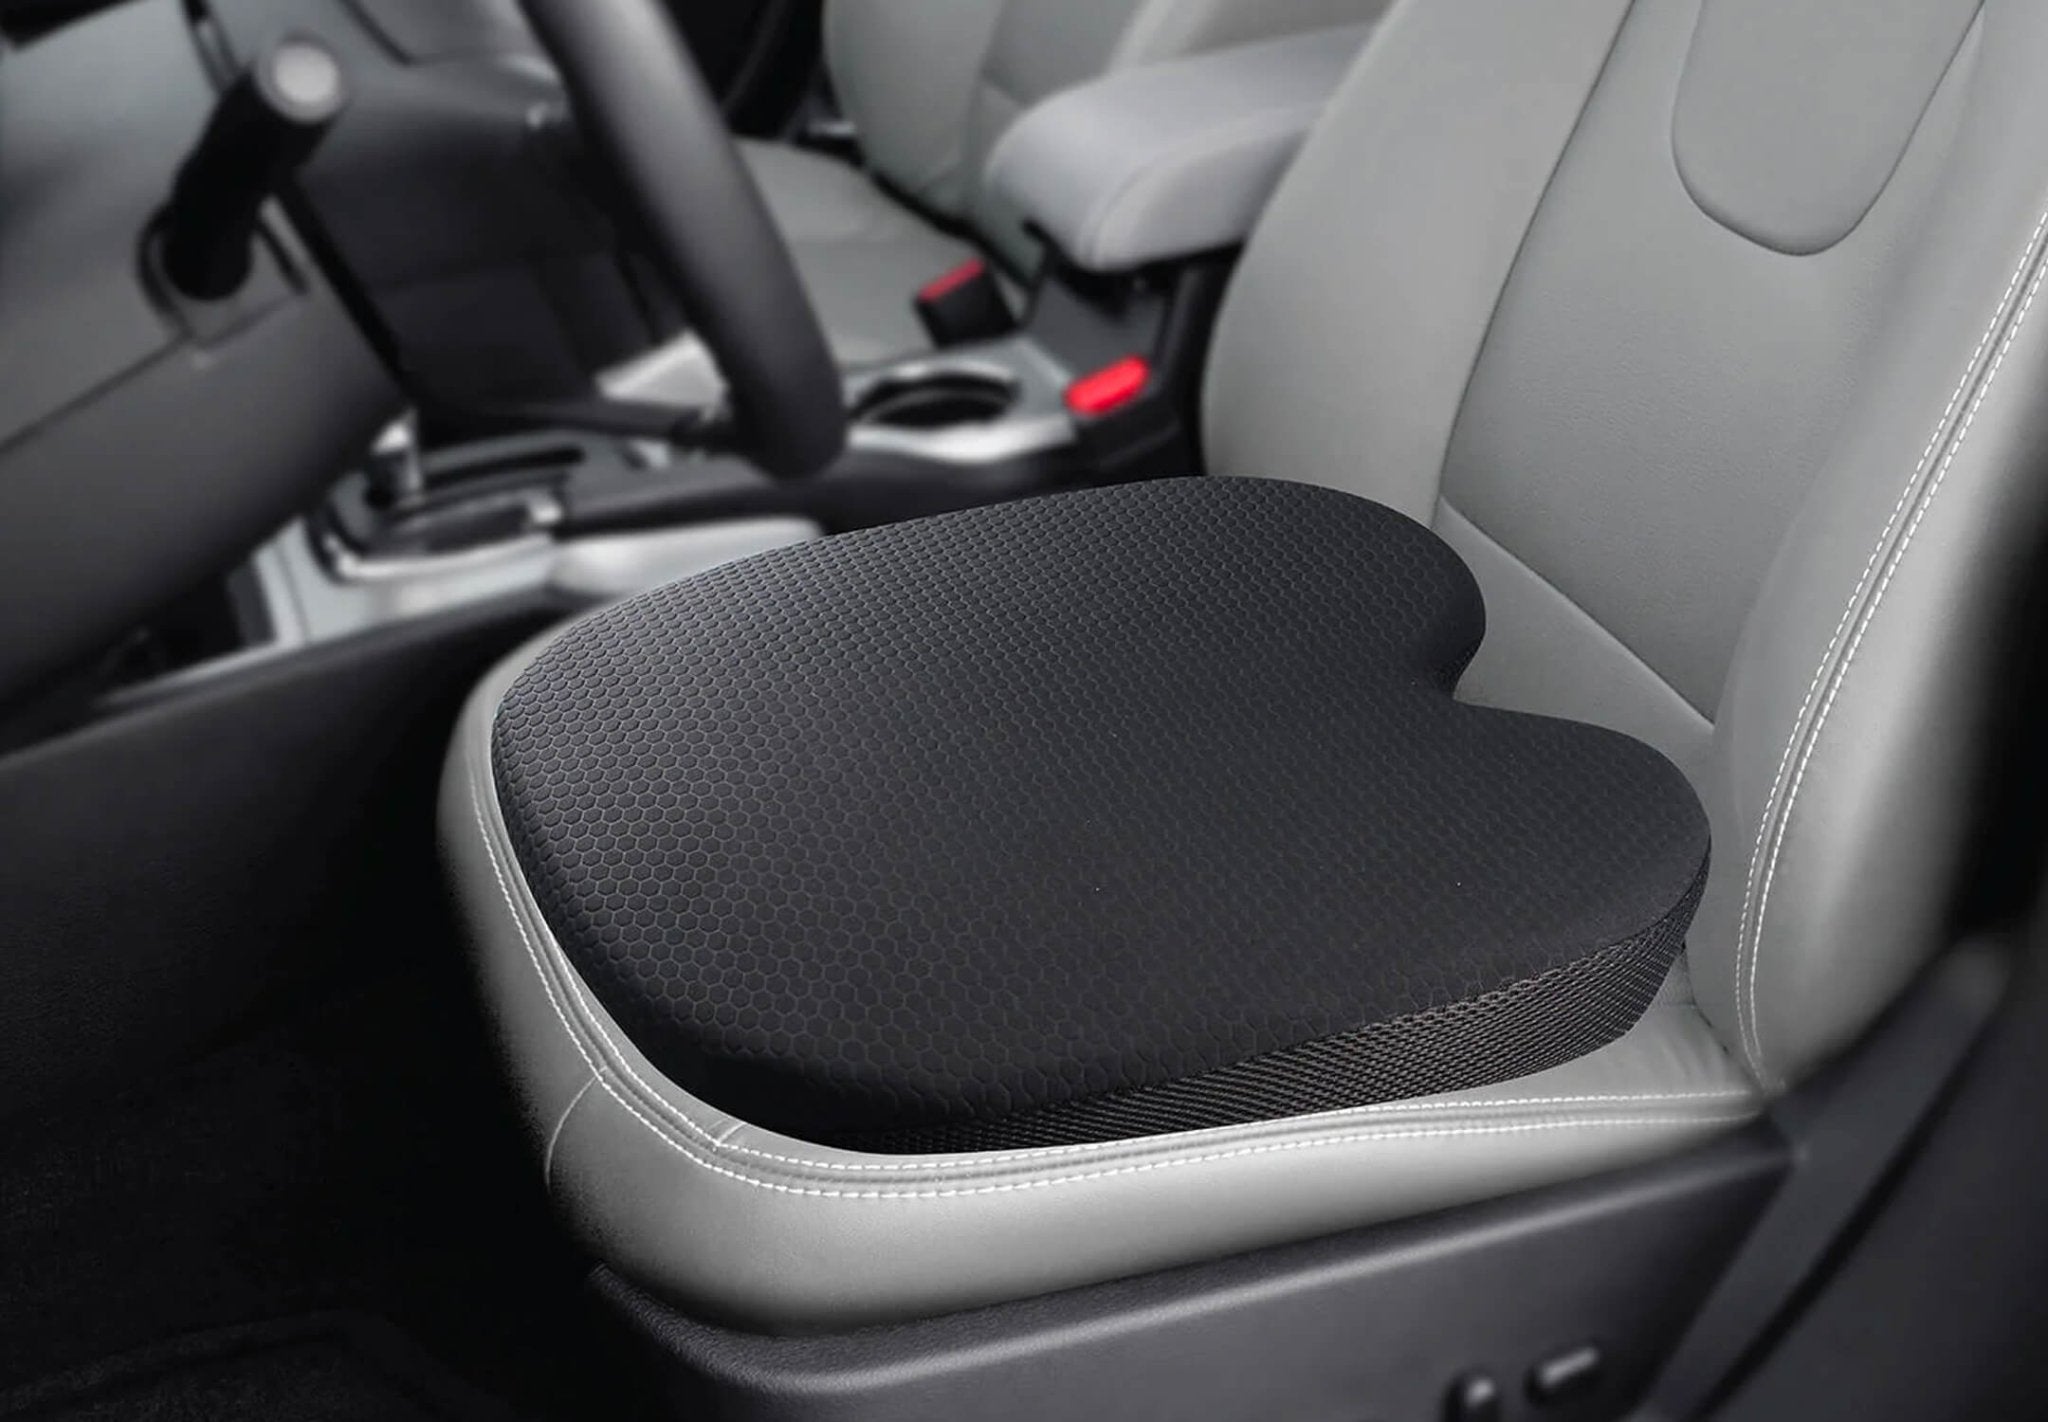 Vibration Mitigation Using Car Seat Cushions An Overview